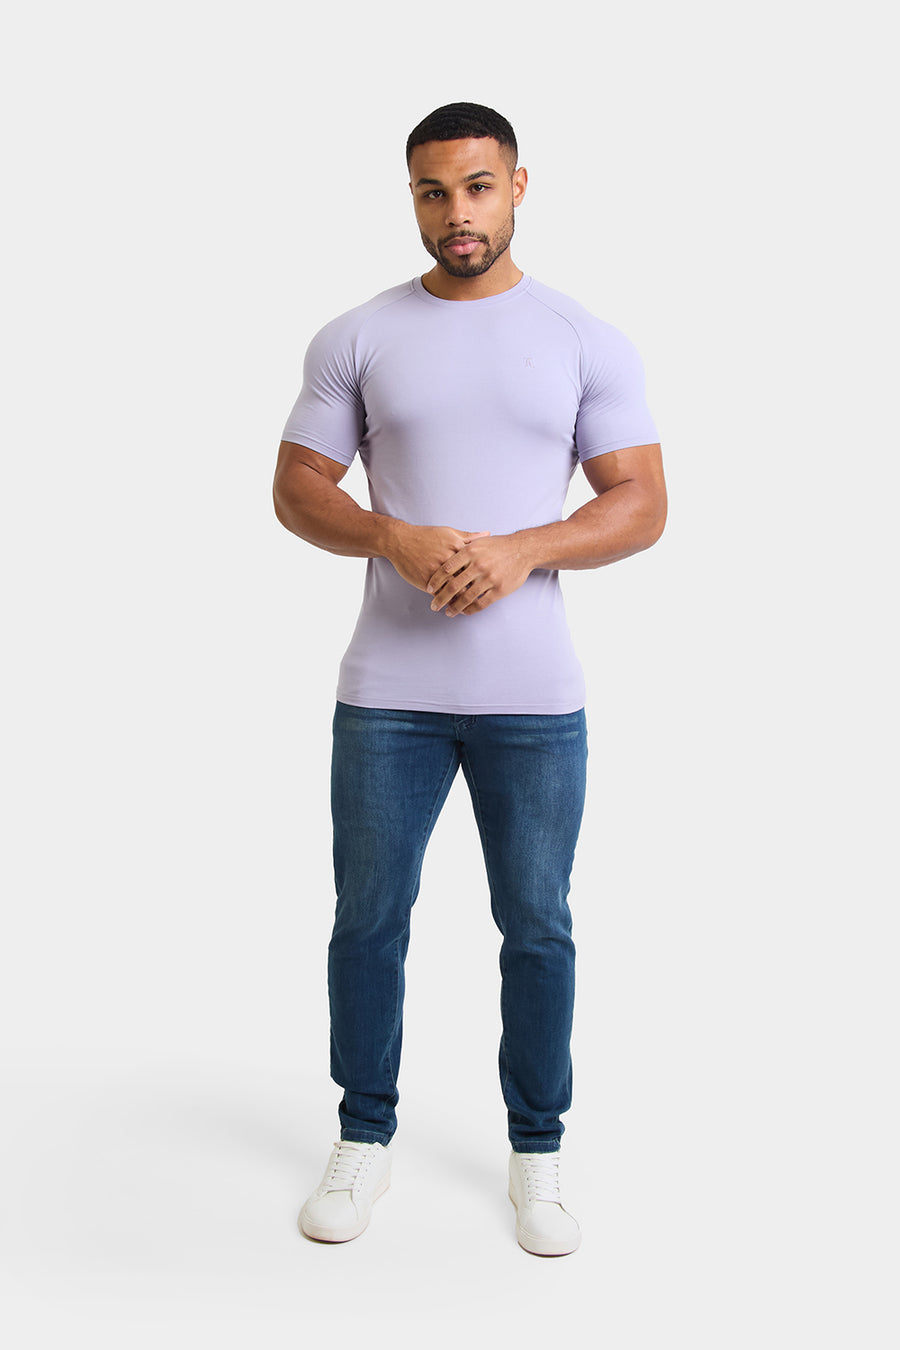 Athletic Fit T-Shirt in Dusty Lilac - TAILORED ATHLETE - USA